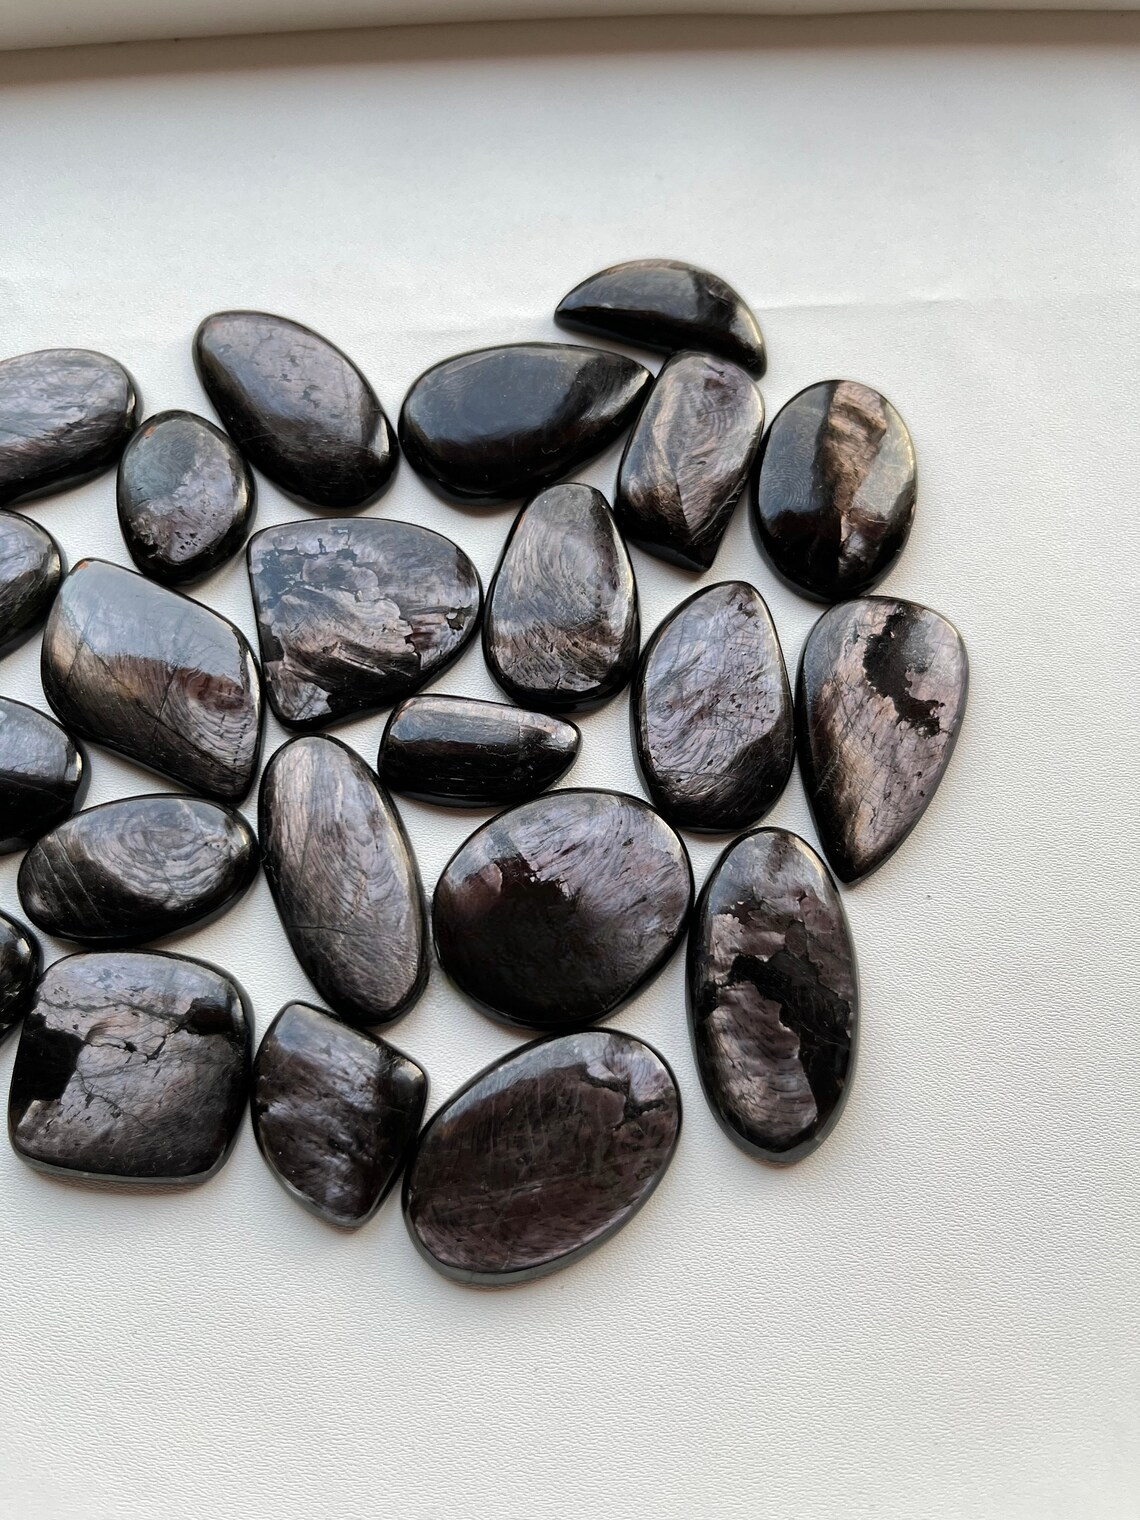 HYPERSTHENE Cabochon Wholesale Lot By Weight With Different Shapes And Sizes Used For Jewelry Making (Natural)